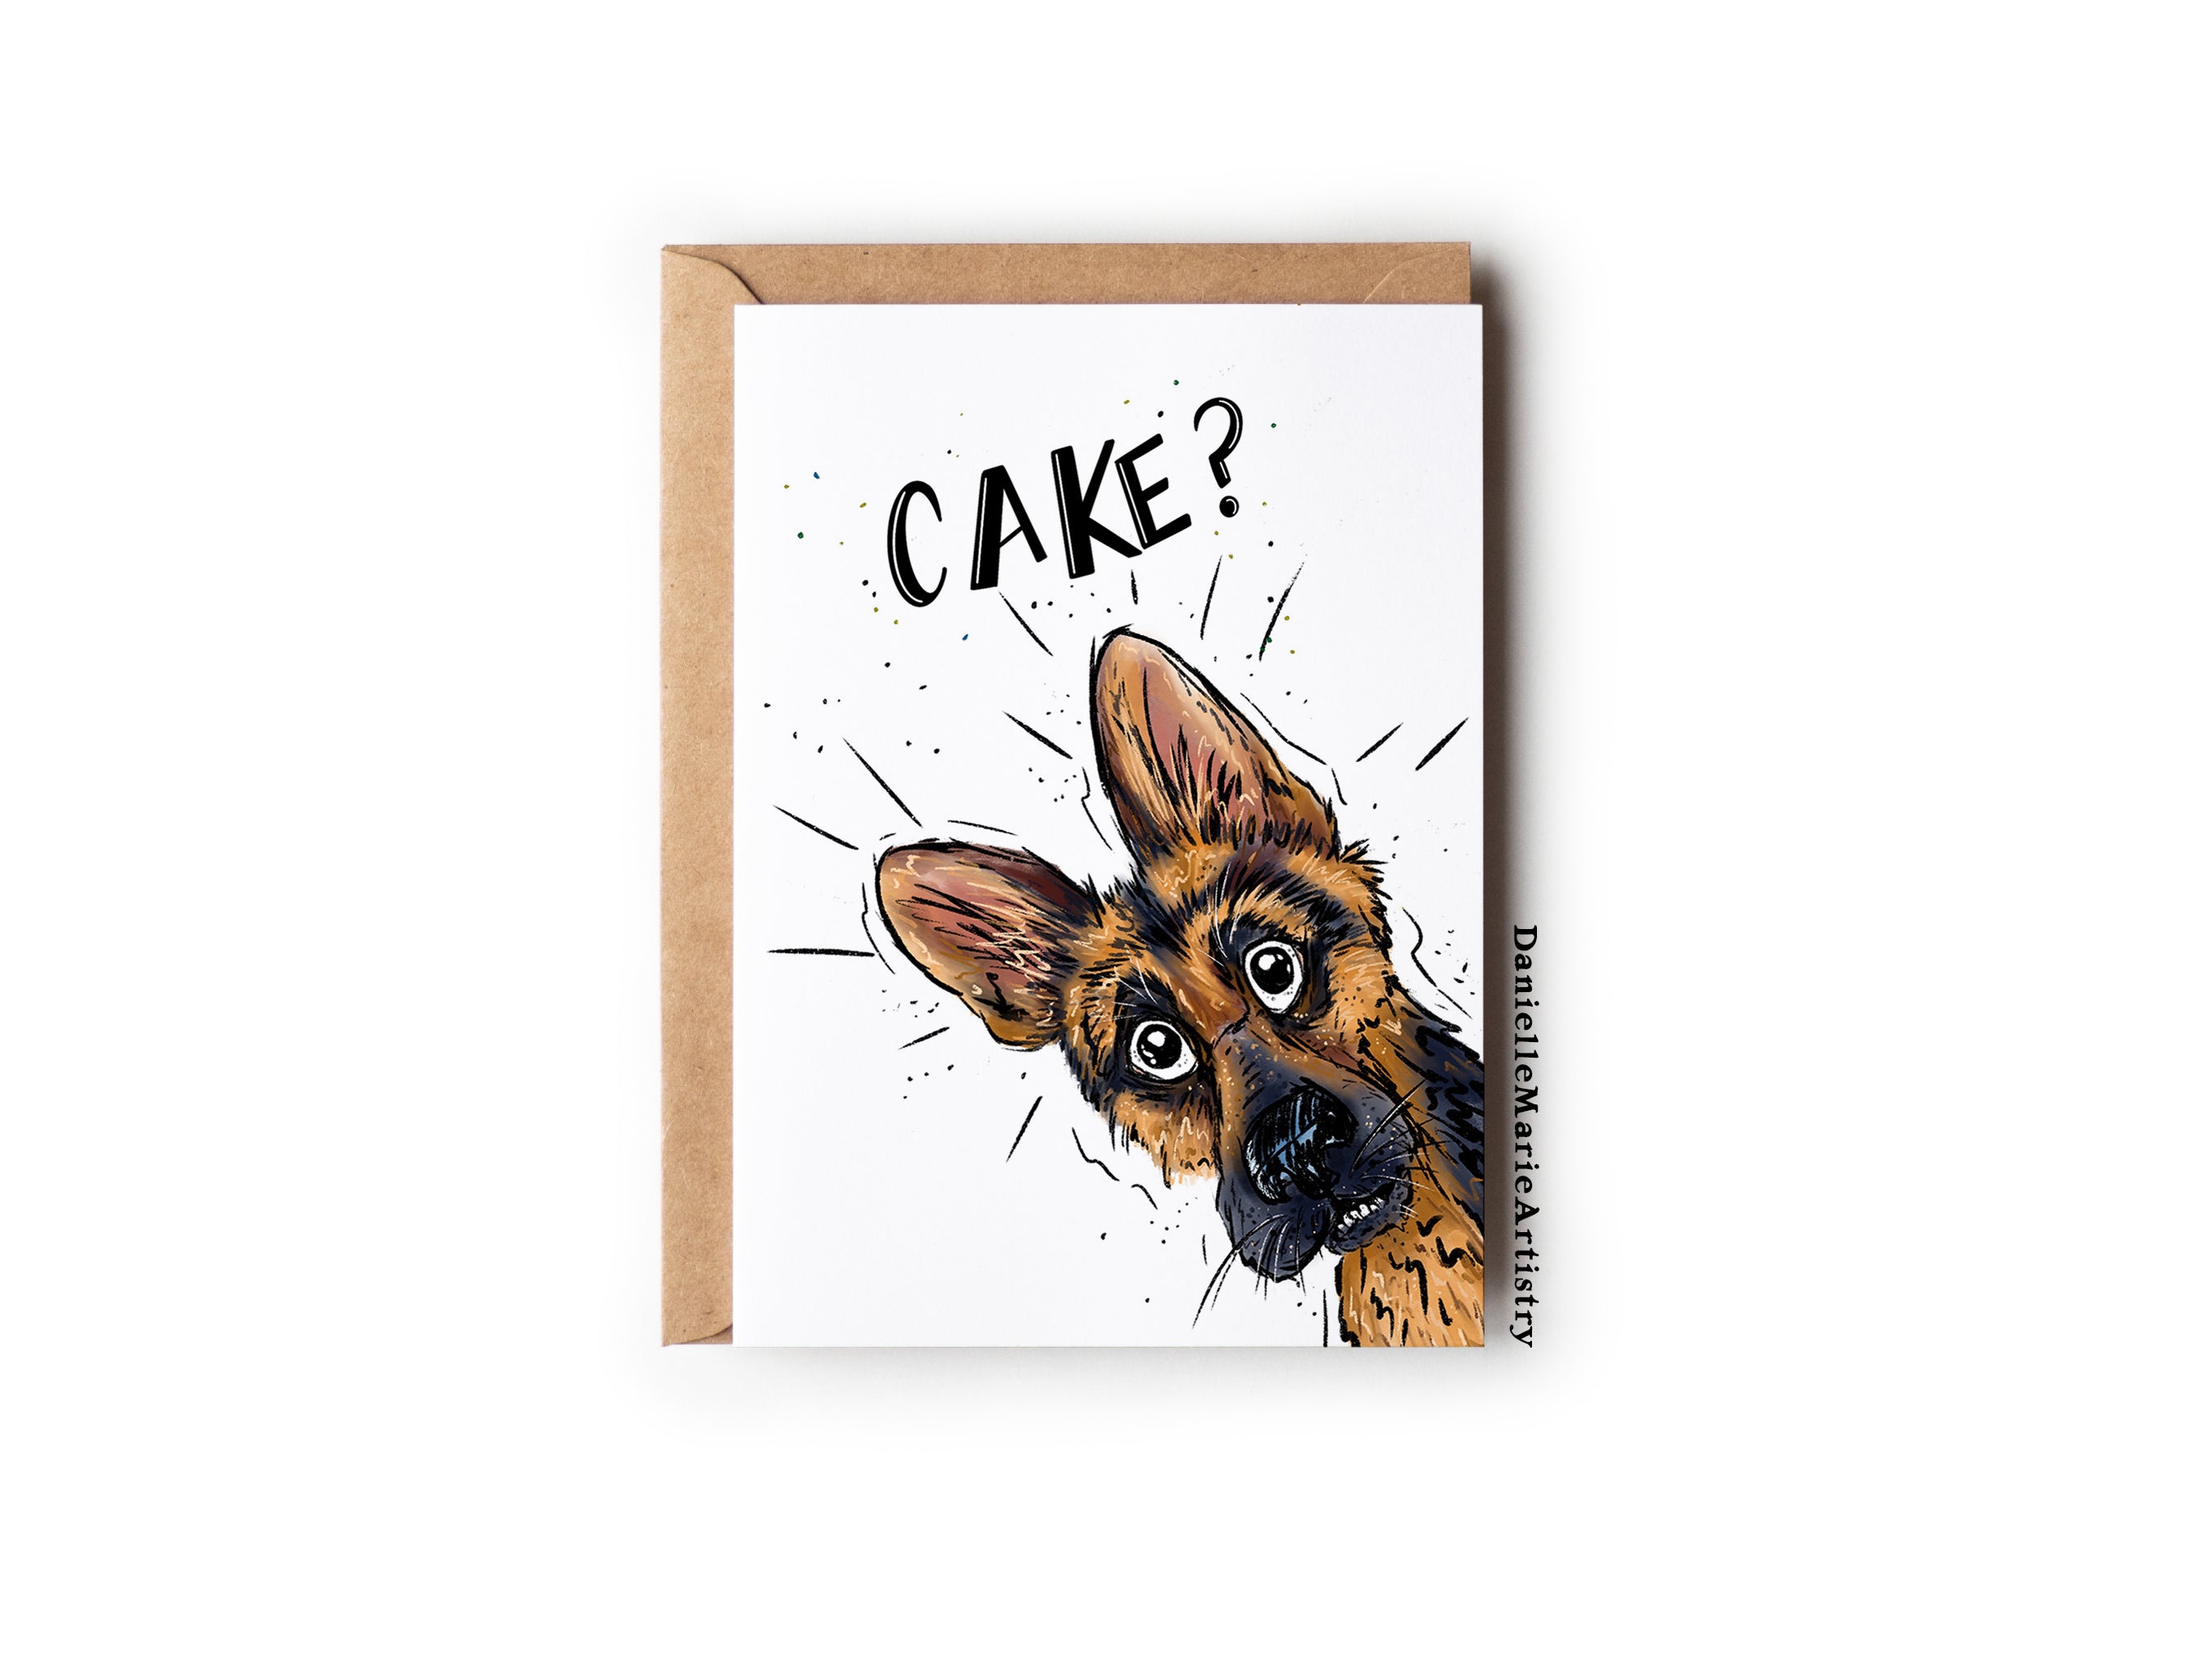 Where's the Cake?! - Greeting Card